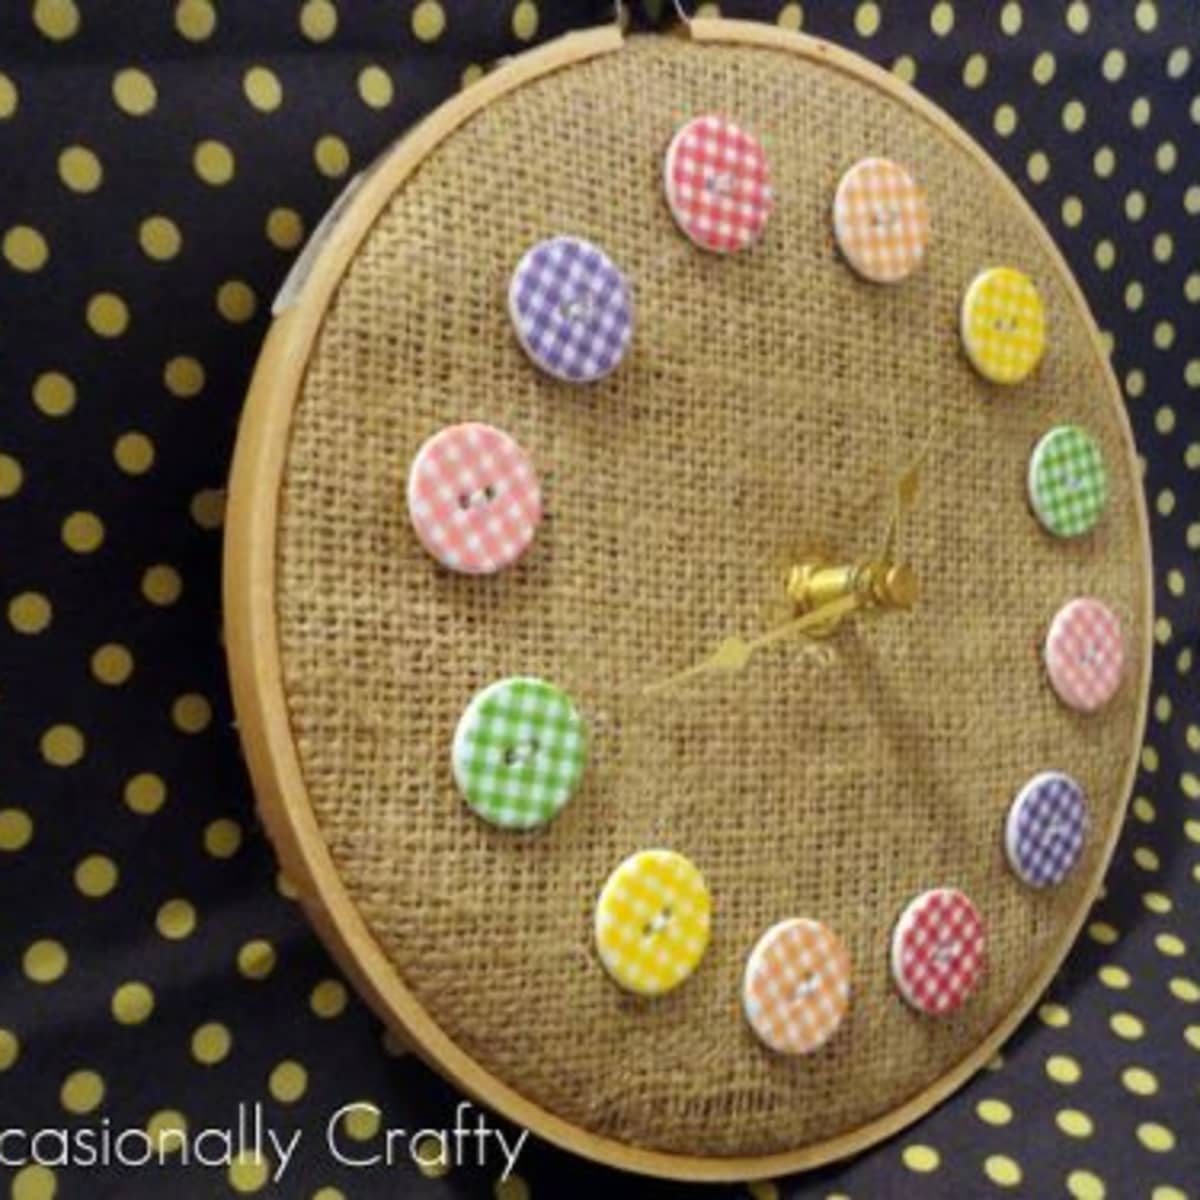 8 Creative Ways to Reuse Old Waste BUTTONS  Craft Ideas from Random Waste  Buttons. 